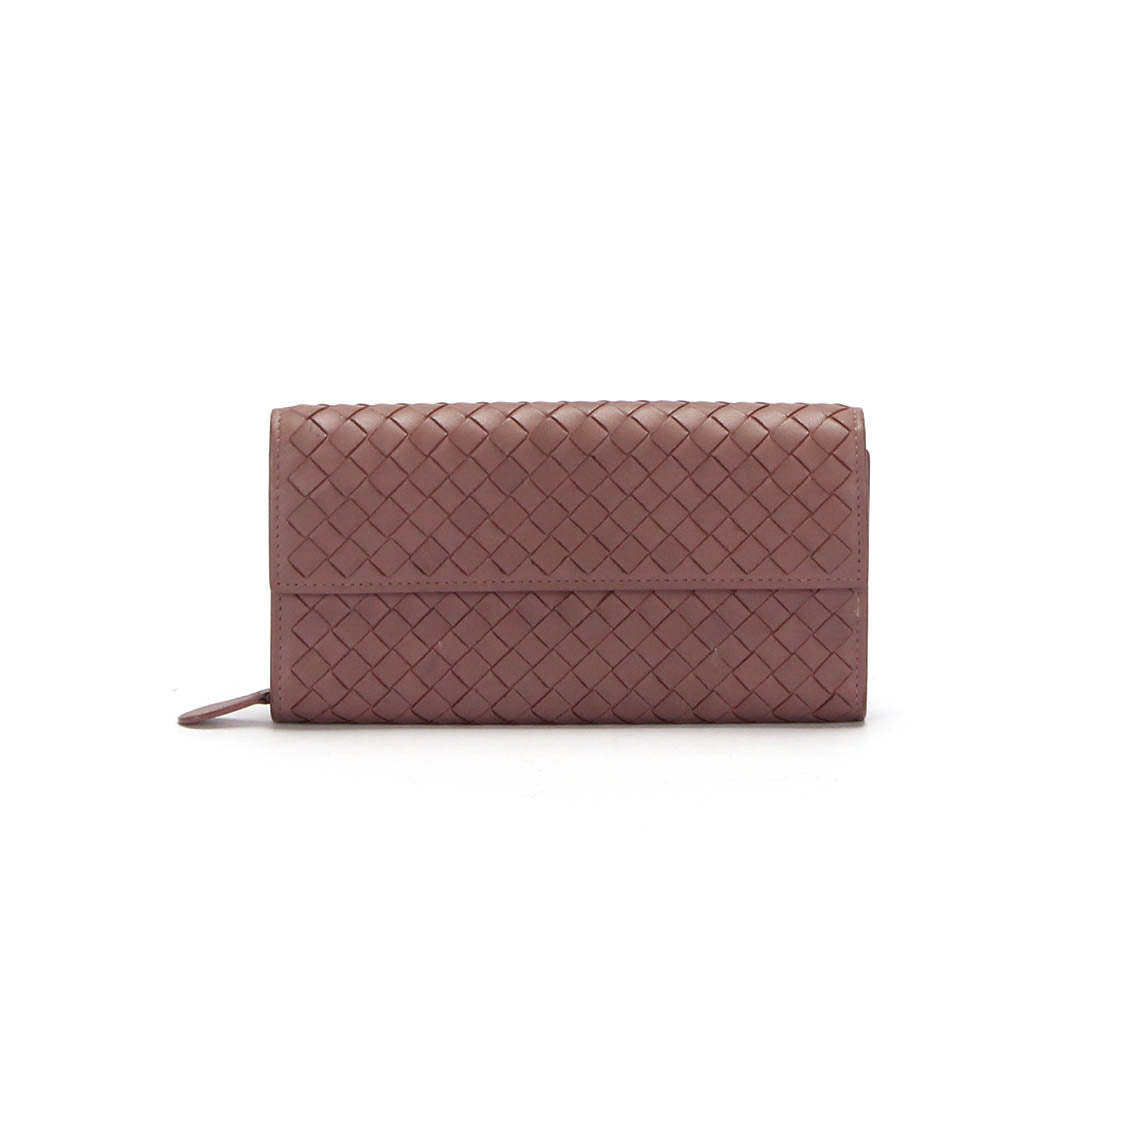 Intrecciato Leather Long Wallet B01907748F